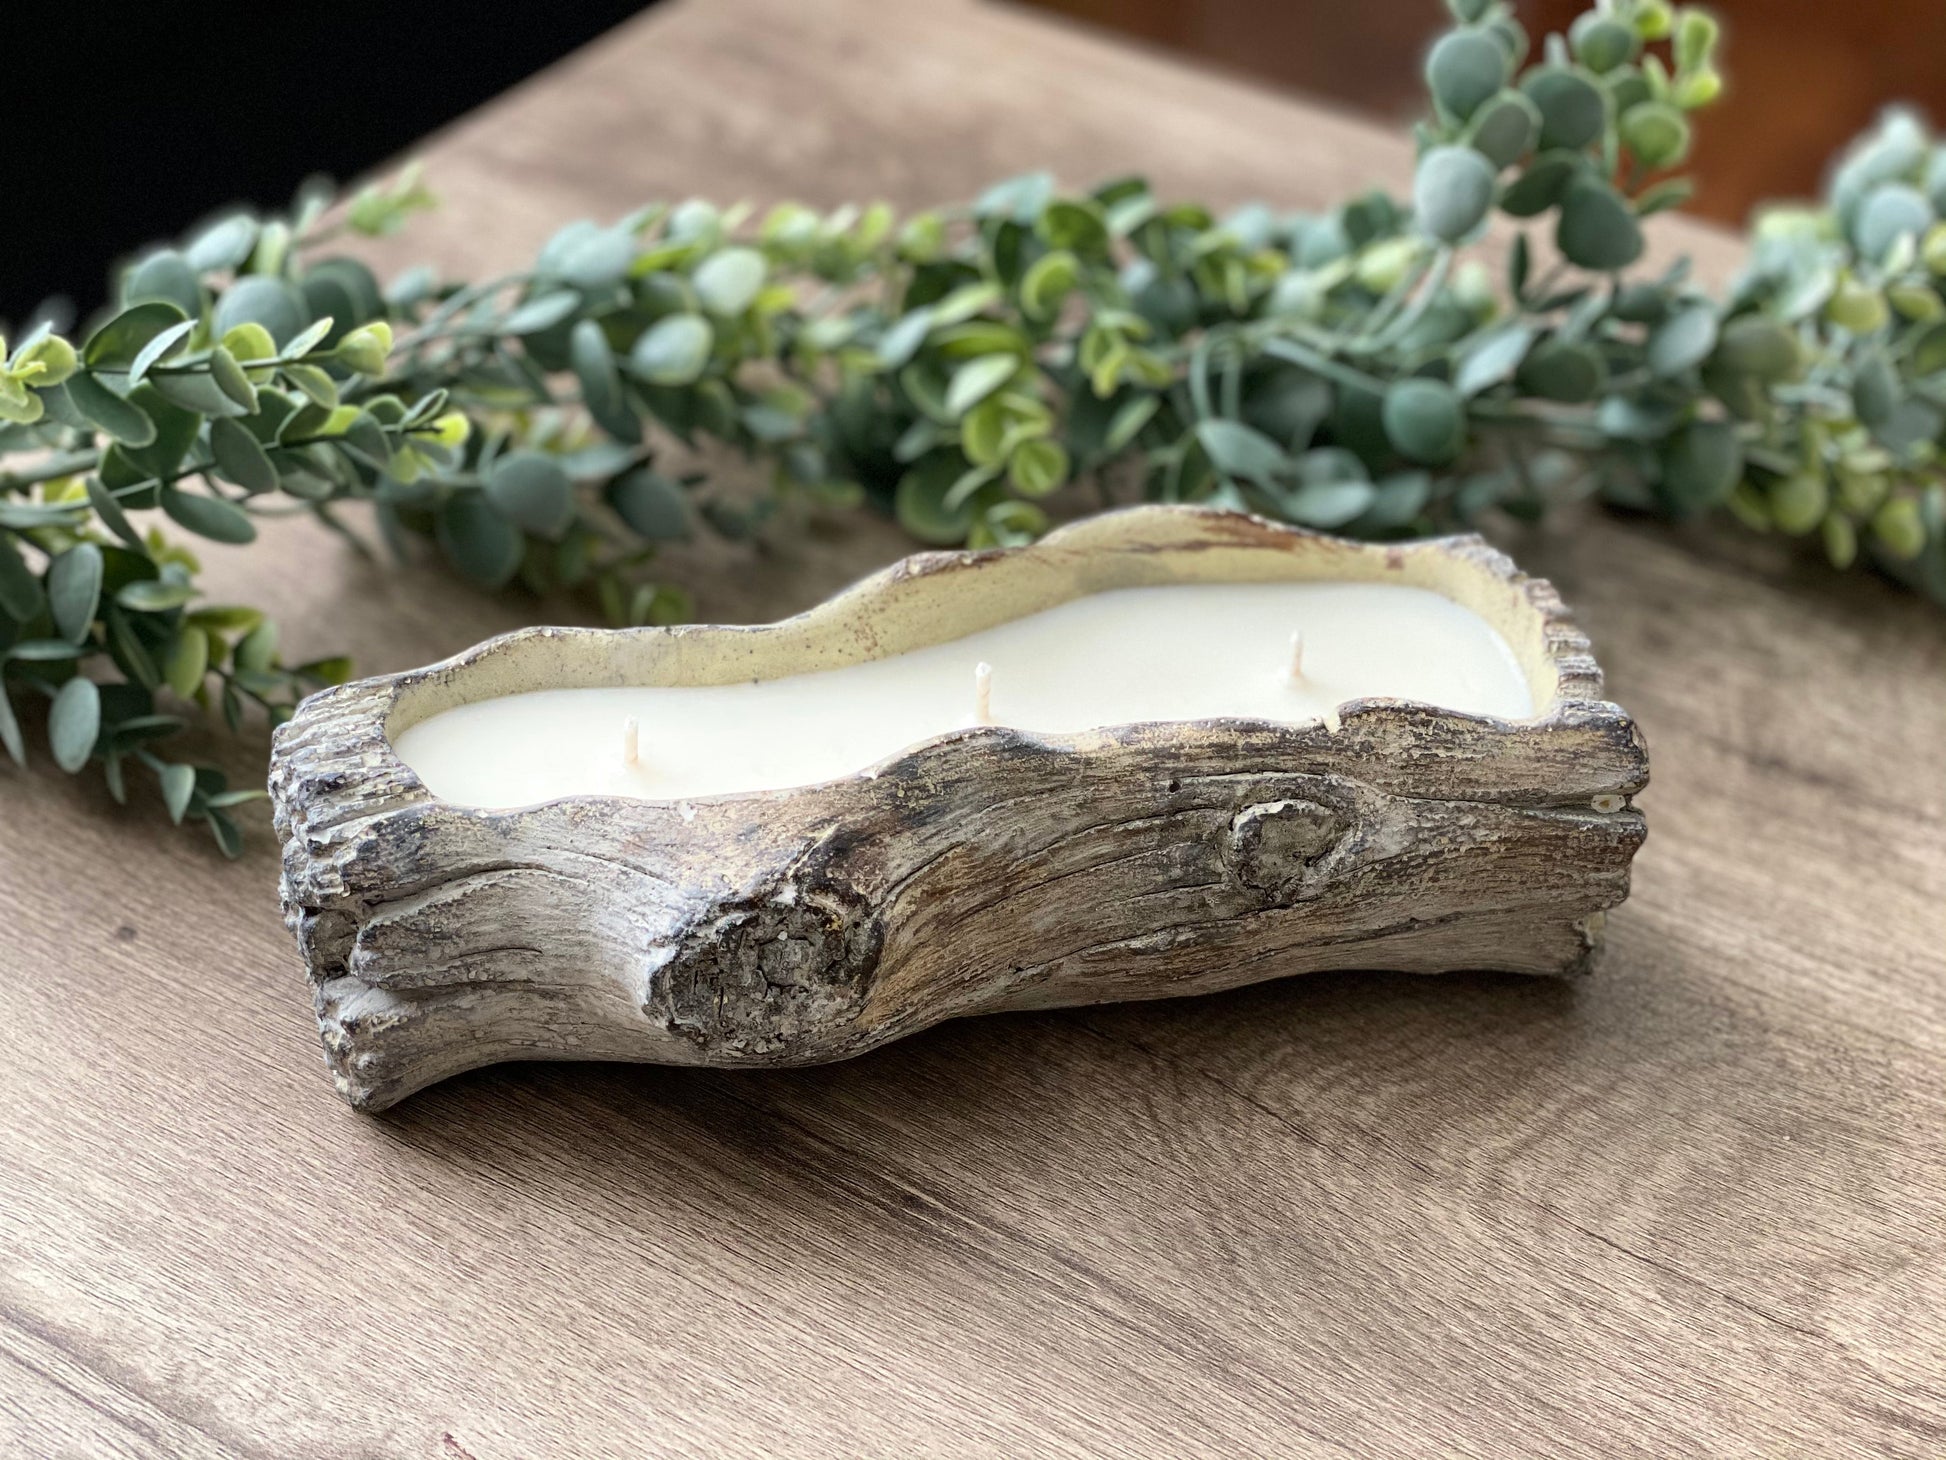 Cement Tree Log Decor Candle | Day At The Spa | 12 oz. A unique piece of home decor that works perfectly for indoor and outdoor space. When you finished the candle, this cement log can be used as planter, serving dish and decorative holder. lemongrass, jasmine, patchouli Bluffton Candles - The Bluffton Shop - Gift Shops